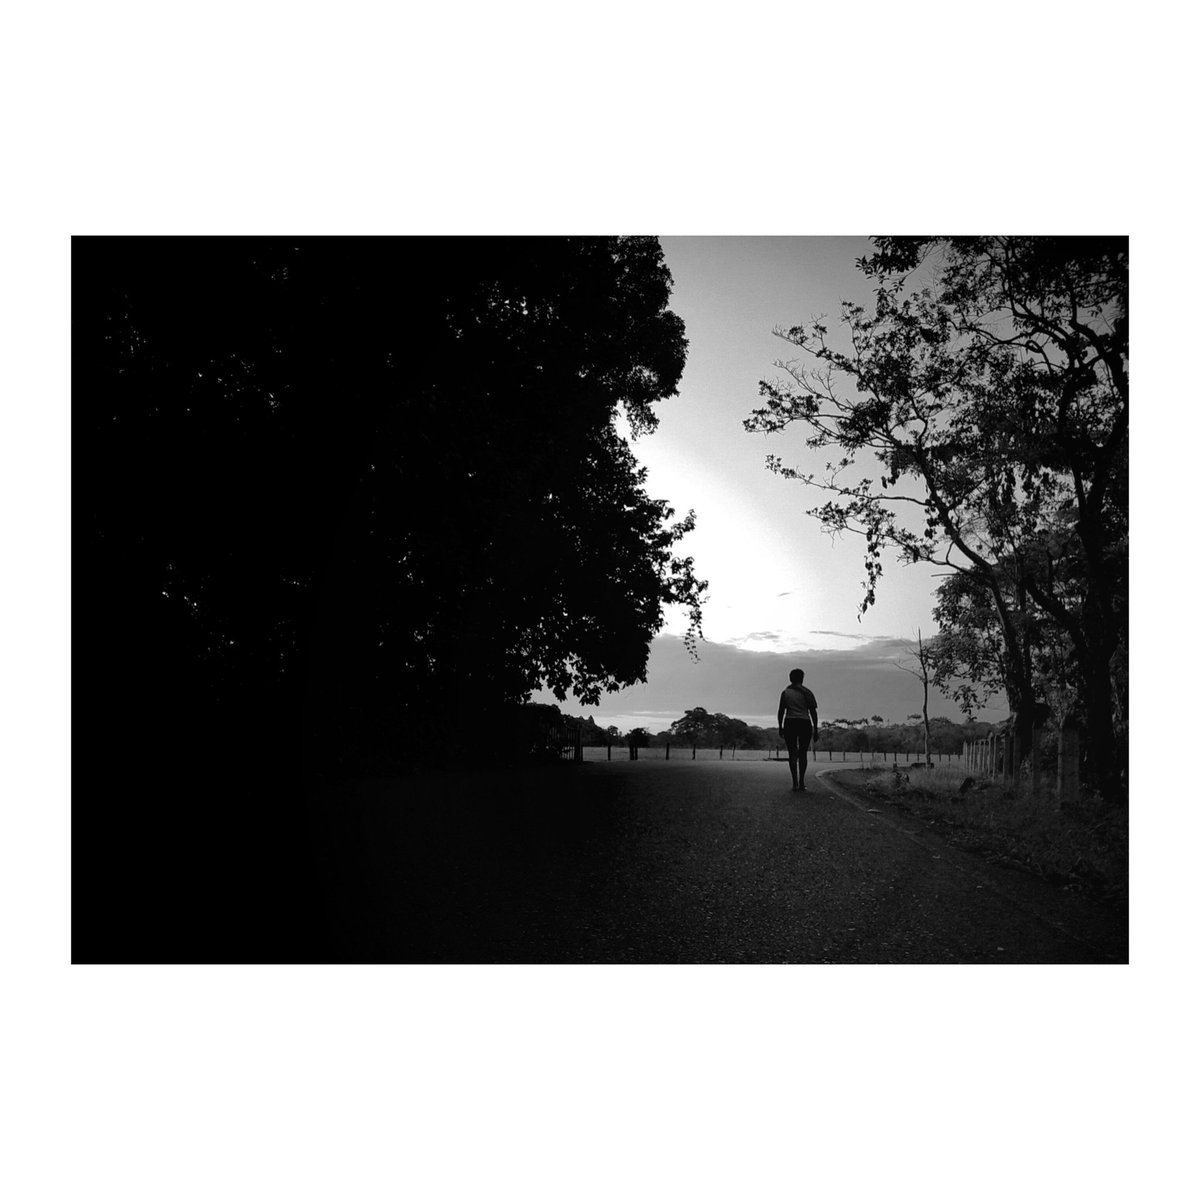 A blanco y negro

#bnwphotography #bnw #bnwfineart #fineart #woofermagazine #mobilephotography #smartphonephotography #mobilecapture #mobgraphia #lightroom #snapseed #lightandshadow #lucesysombras #siluetas #silhouettecreative